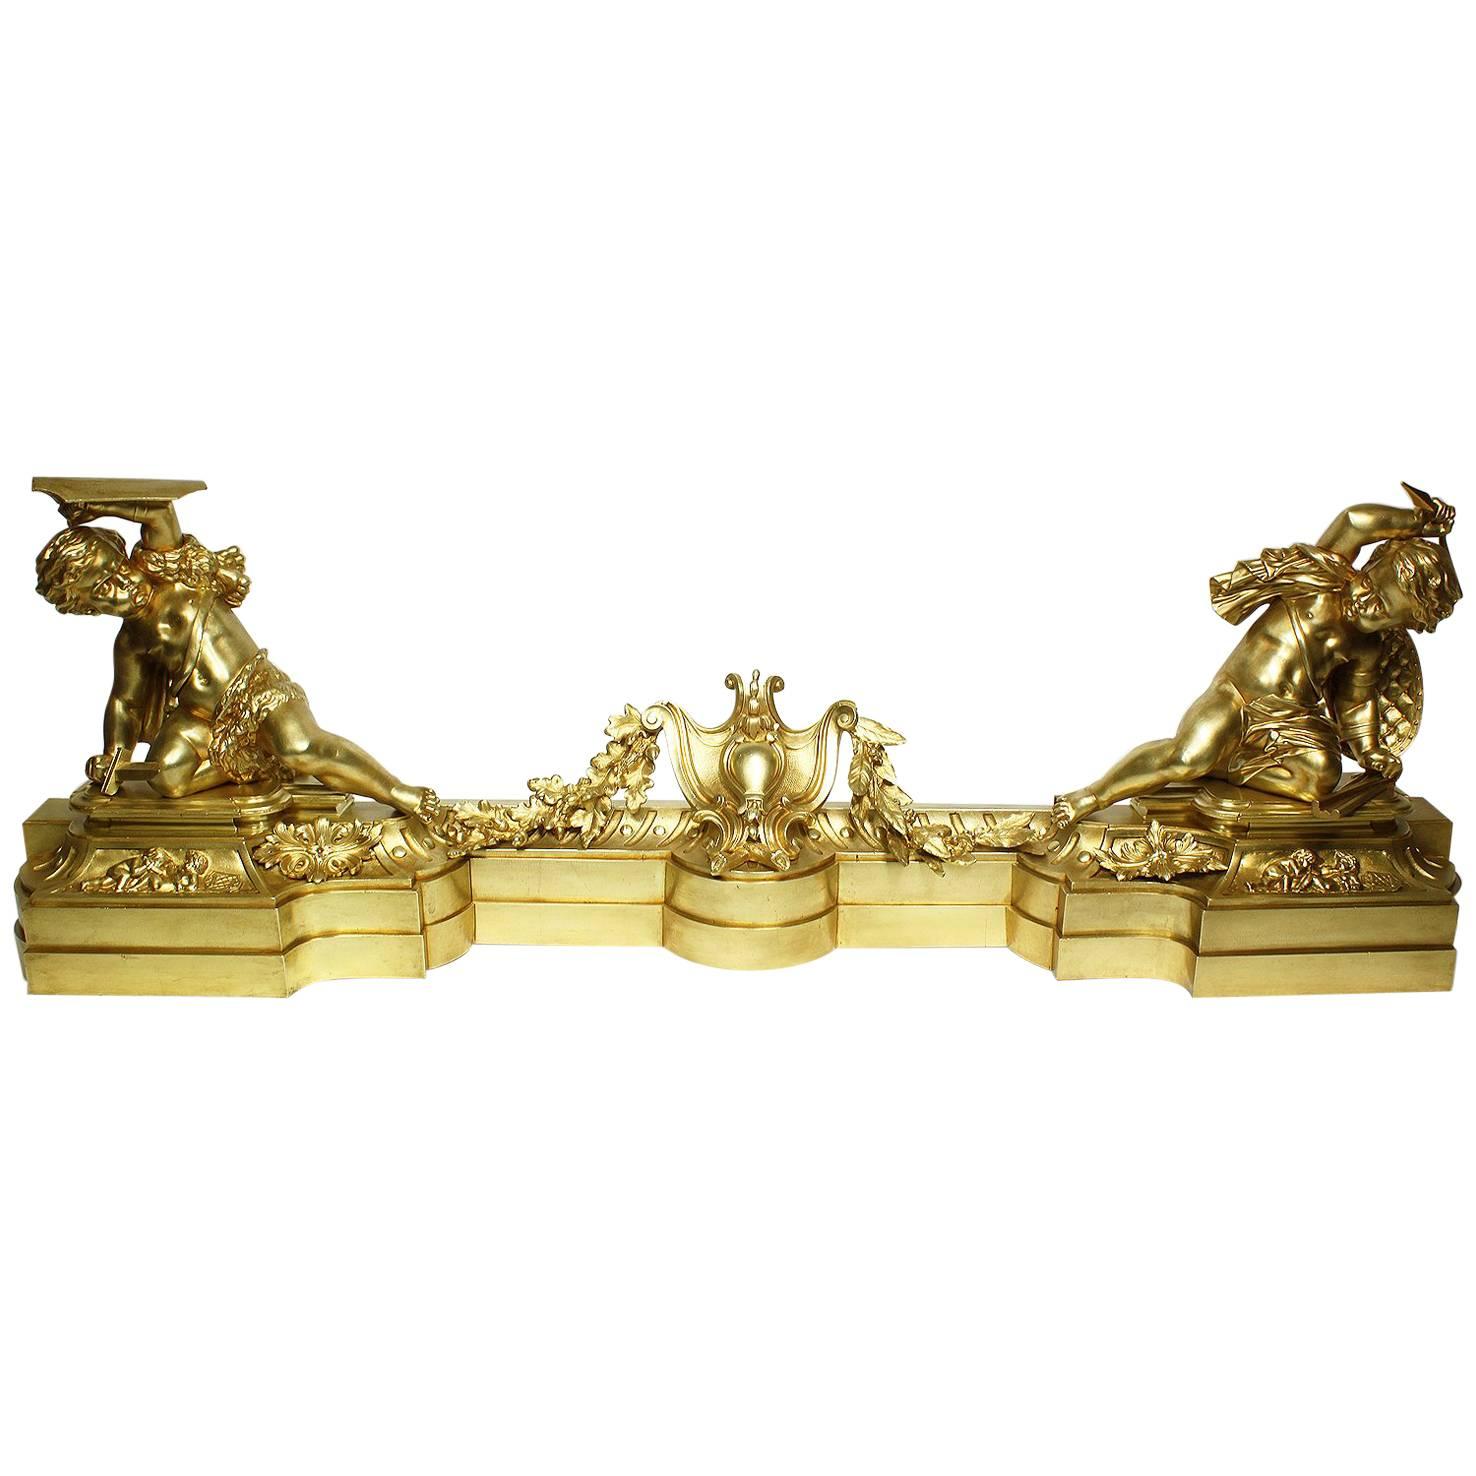 French 19th Century Louis XV Style Gilt Bronze Chenet Set with Playful Children